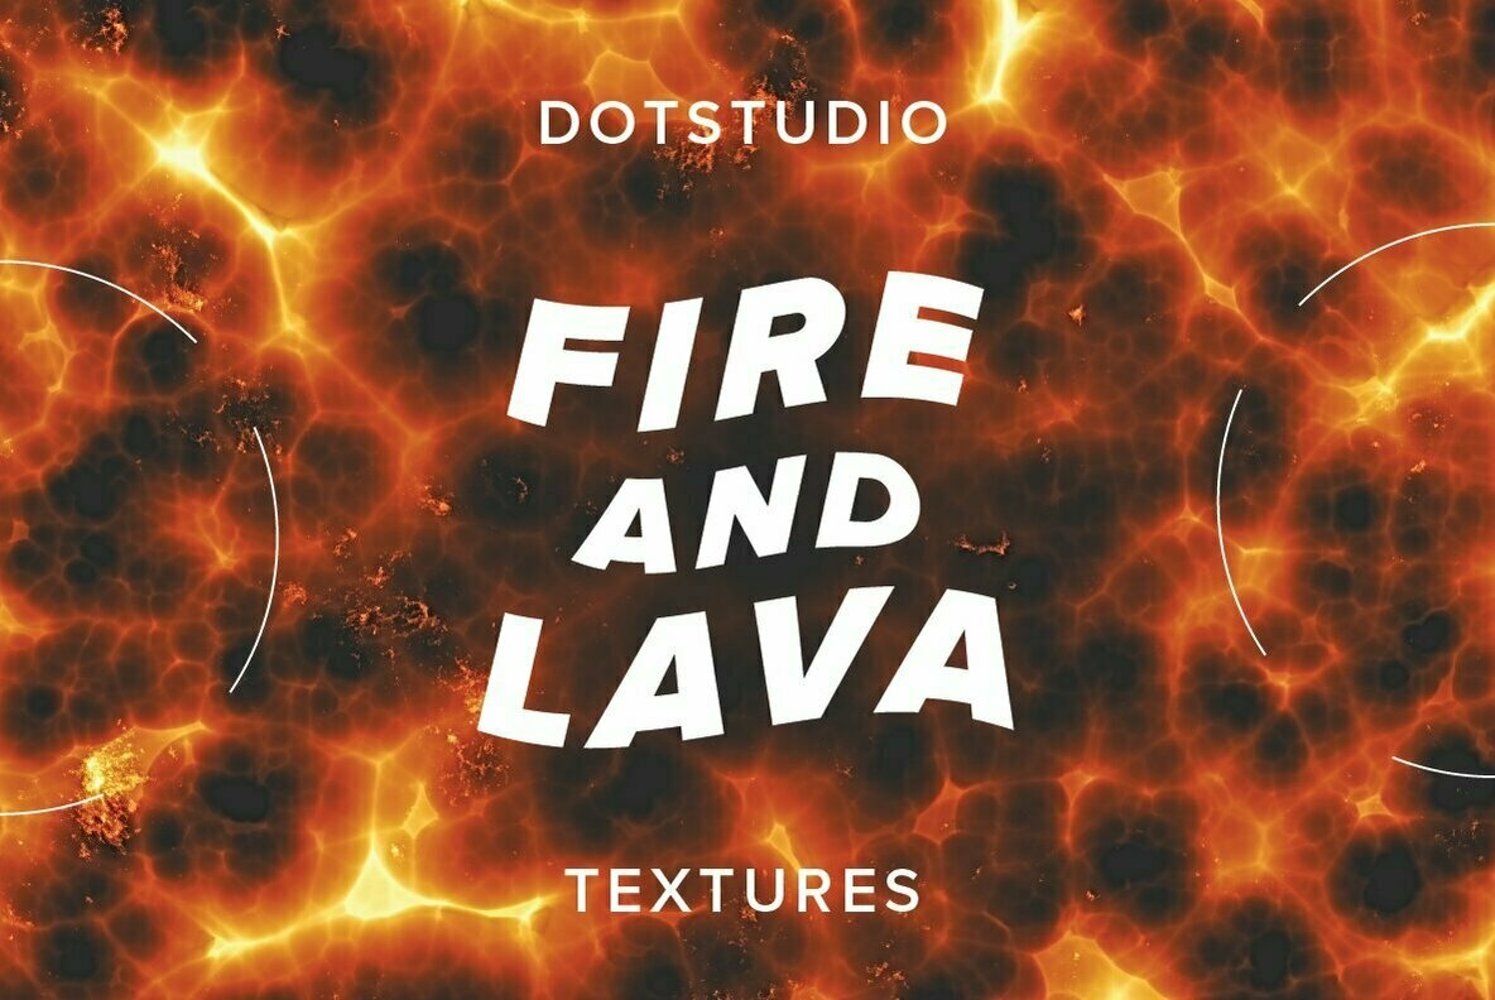 Cover image of Fire and lava textures.